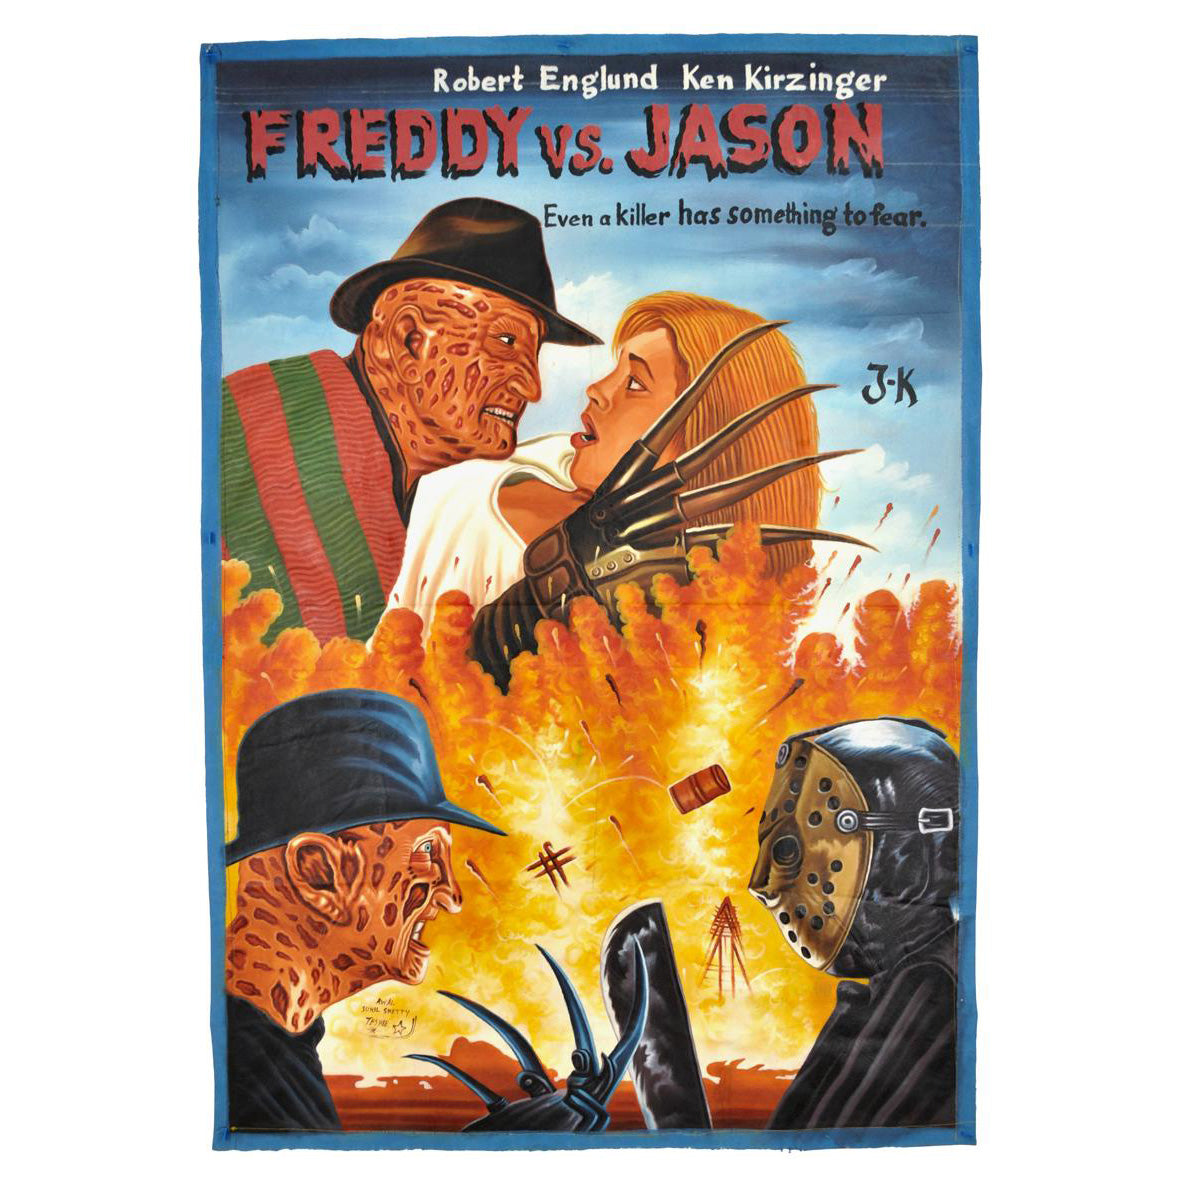 FREDDY VS JASON MOVIE POSTER HAND PAINTED IN GHANA FOR THE LOCAL CINEMA ART